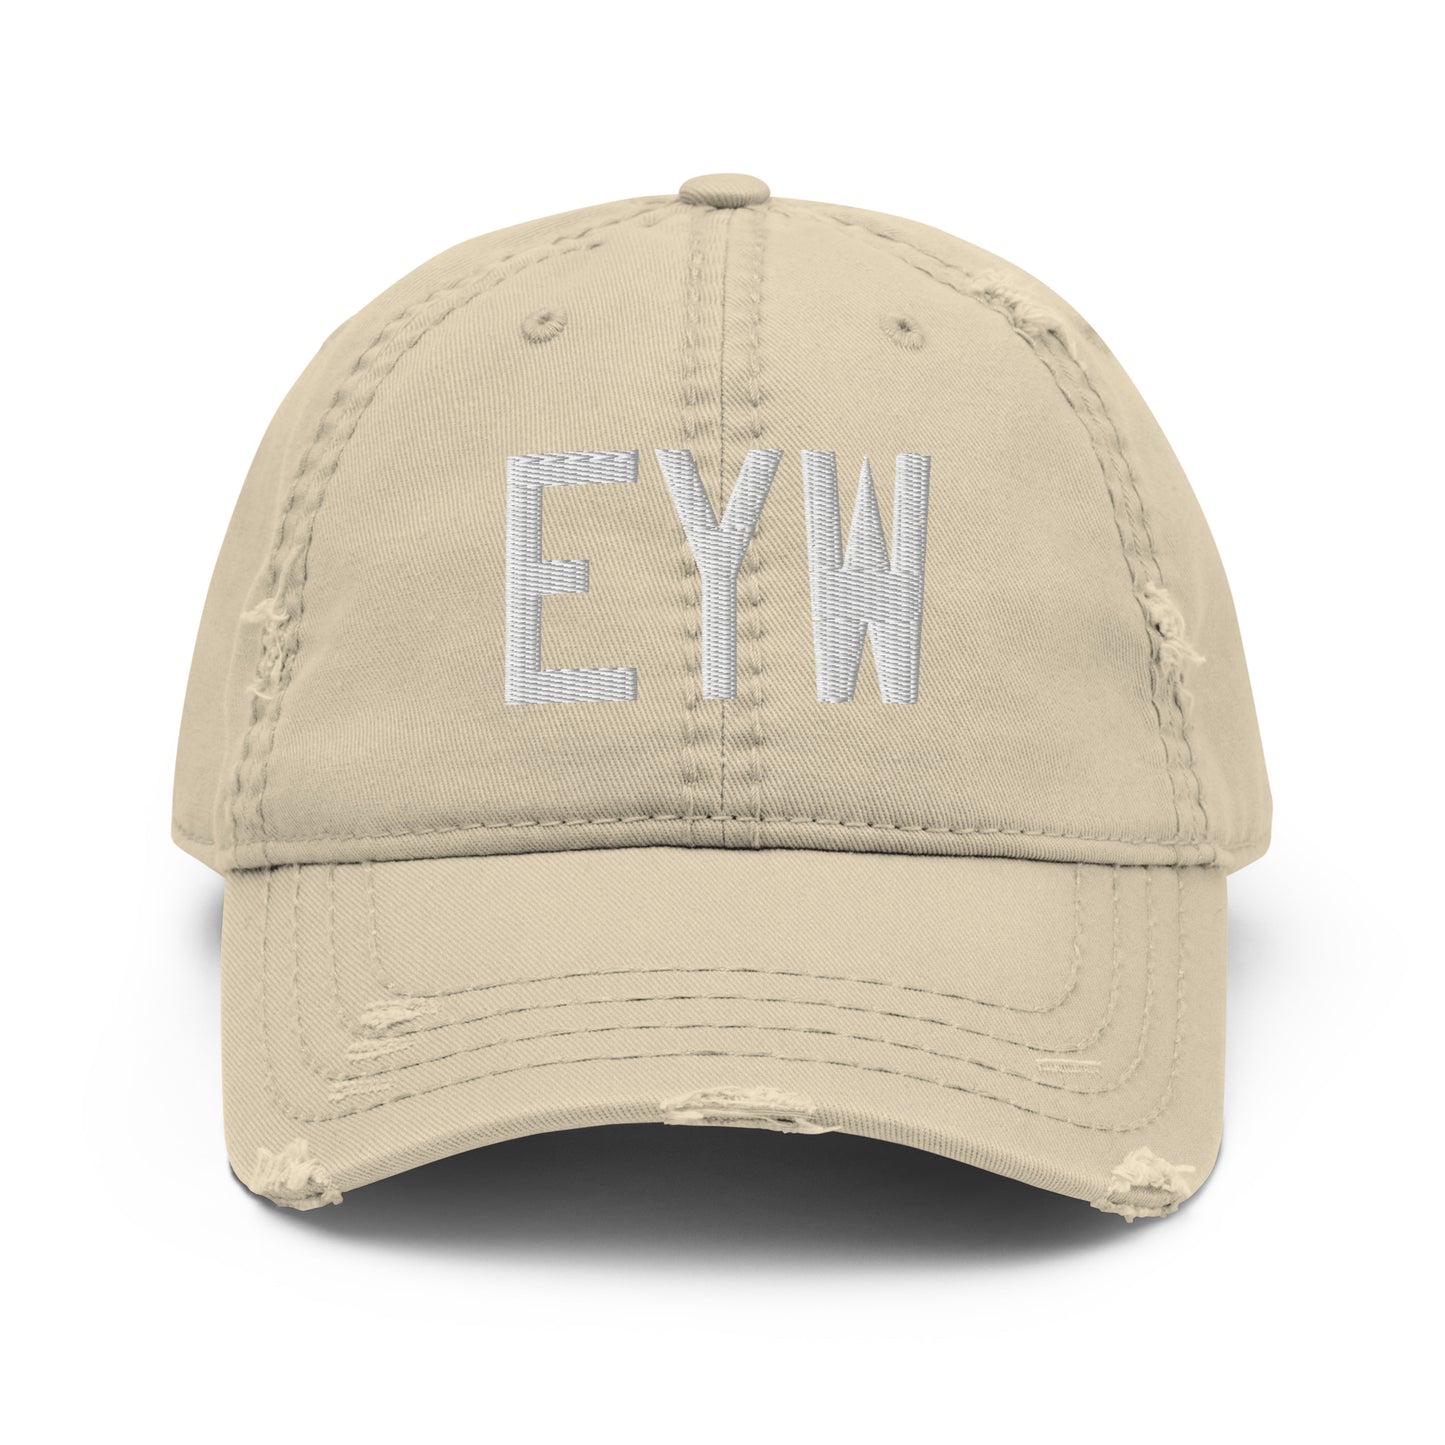 Airport Code Distressed Hat - White • EYW Key West • YHM Designs - Image 18